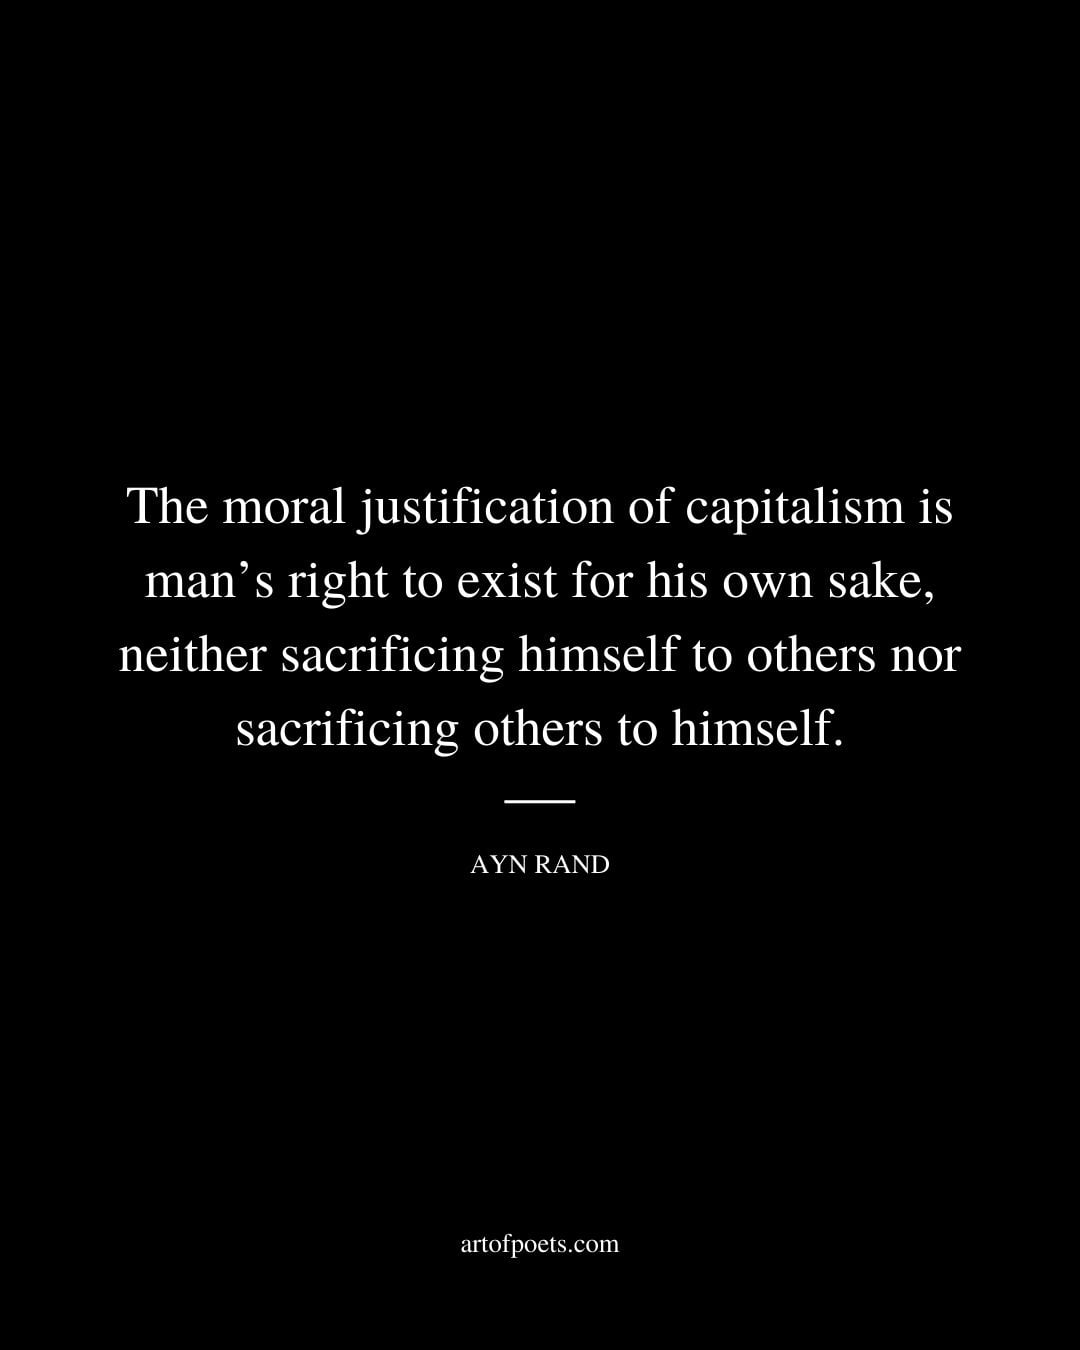 The moral justification of capitalism is mans right to exist for his own sake neither sacrificing himself to others nor sacrificing others to himself